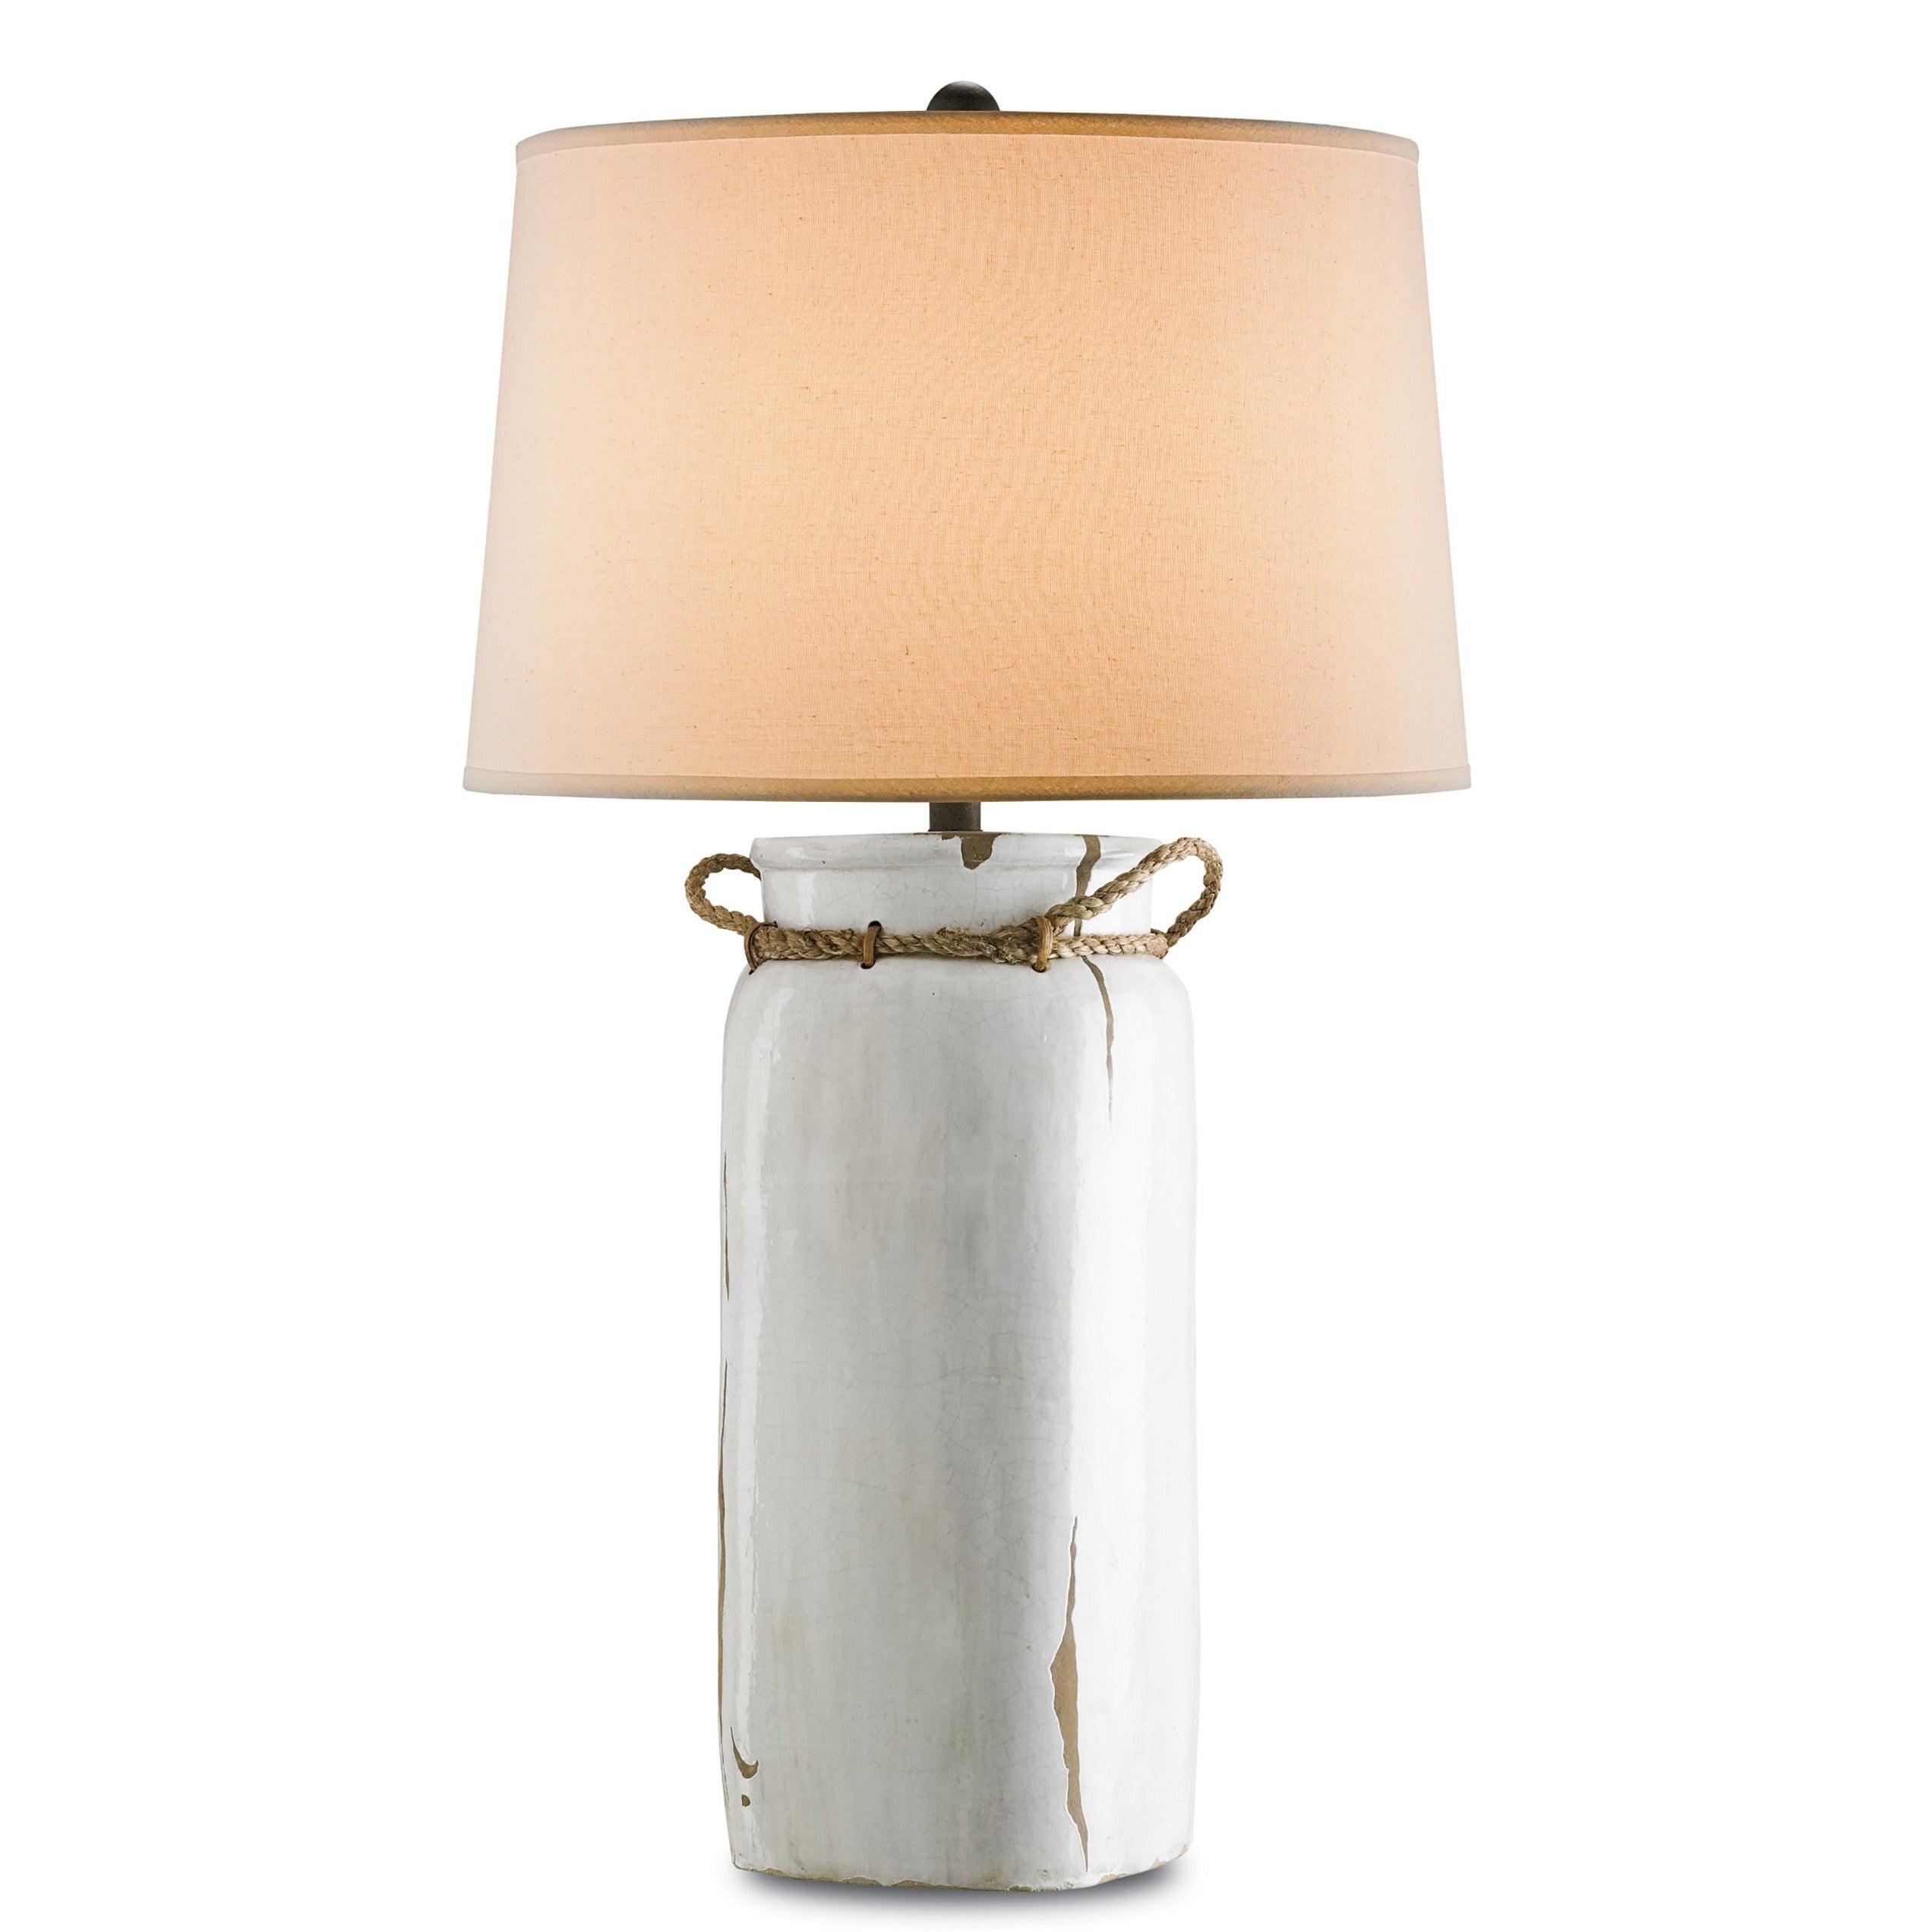 Currey and Company - Sailaway Table Lamp - 6022 | Montreal Lighting & Hardware